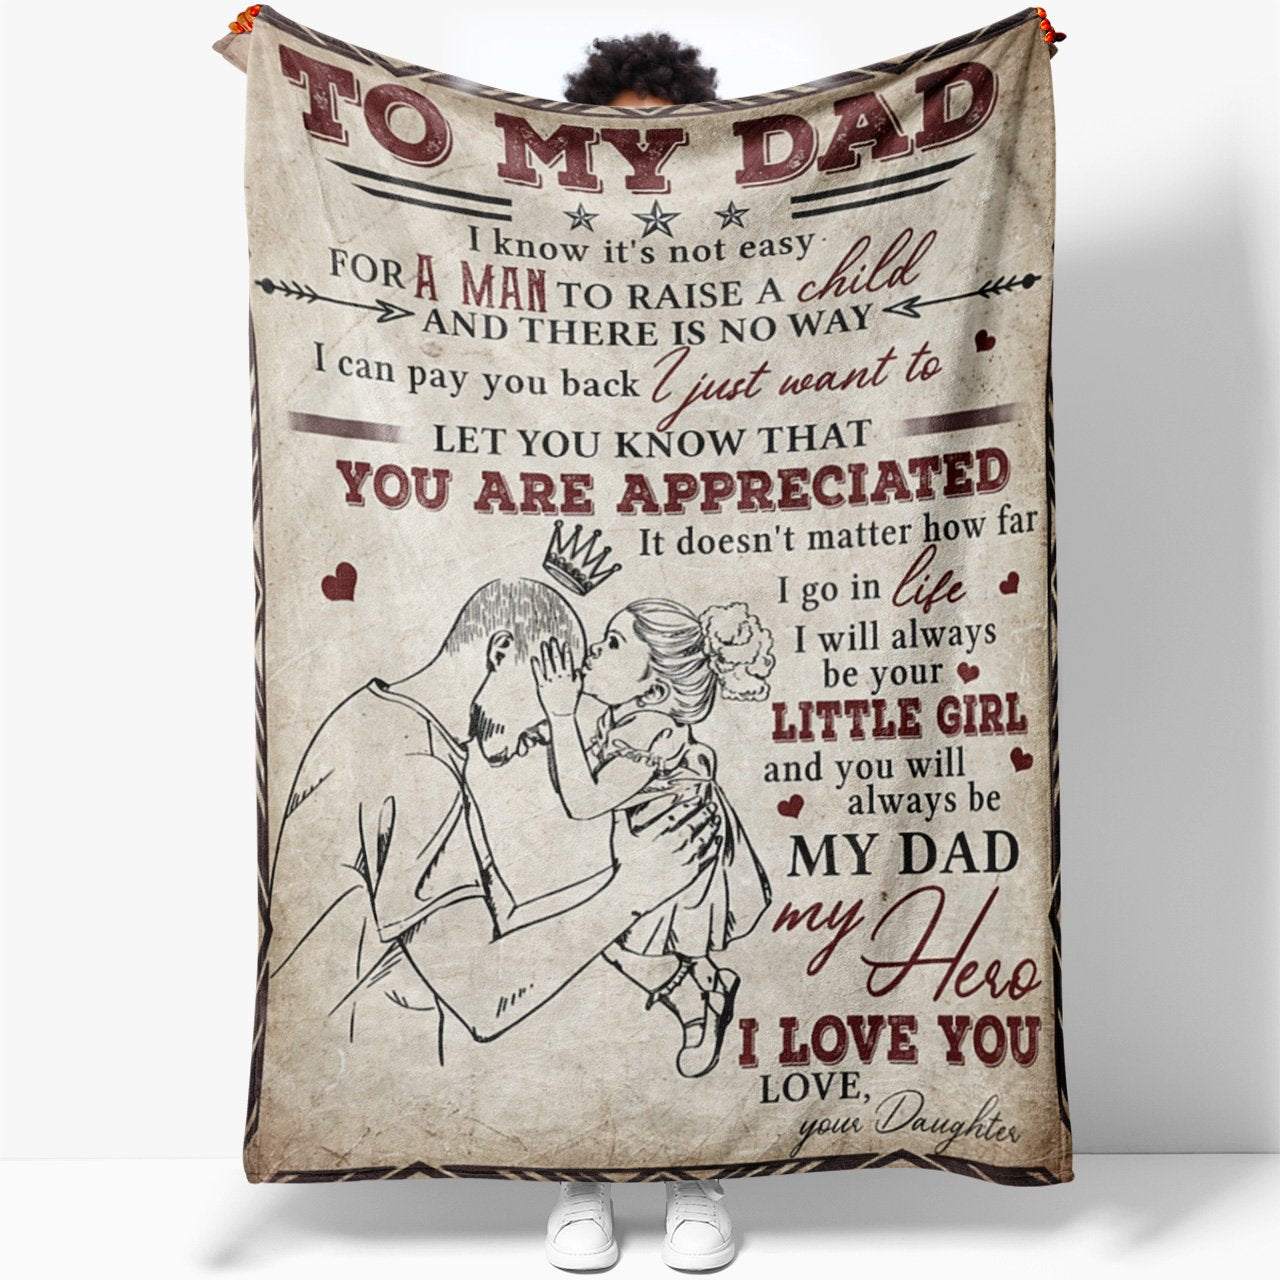 Blanket Gift Ideas for My Black Father, You Are My Hero I Love You Blanket for My Black Panther Blanket Personalized Christmas Fathers Day Gift Ideas